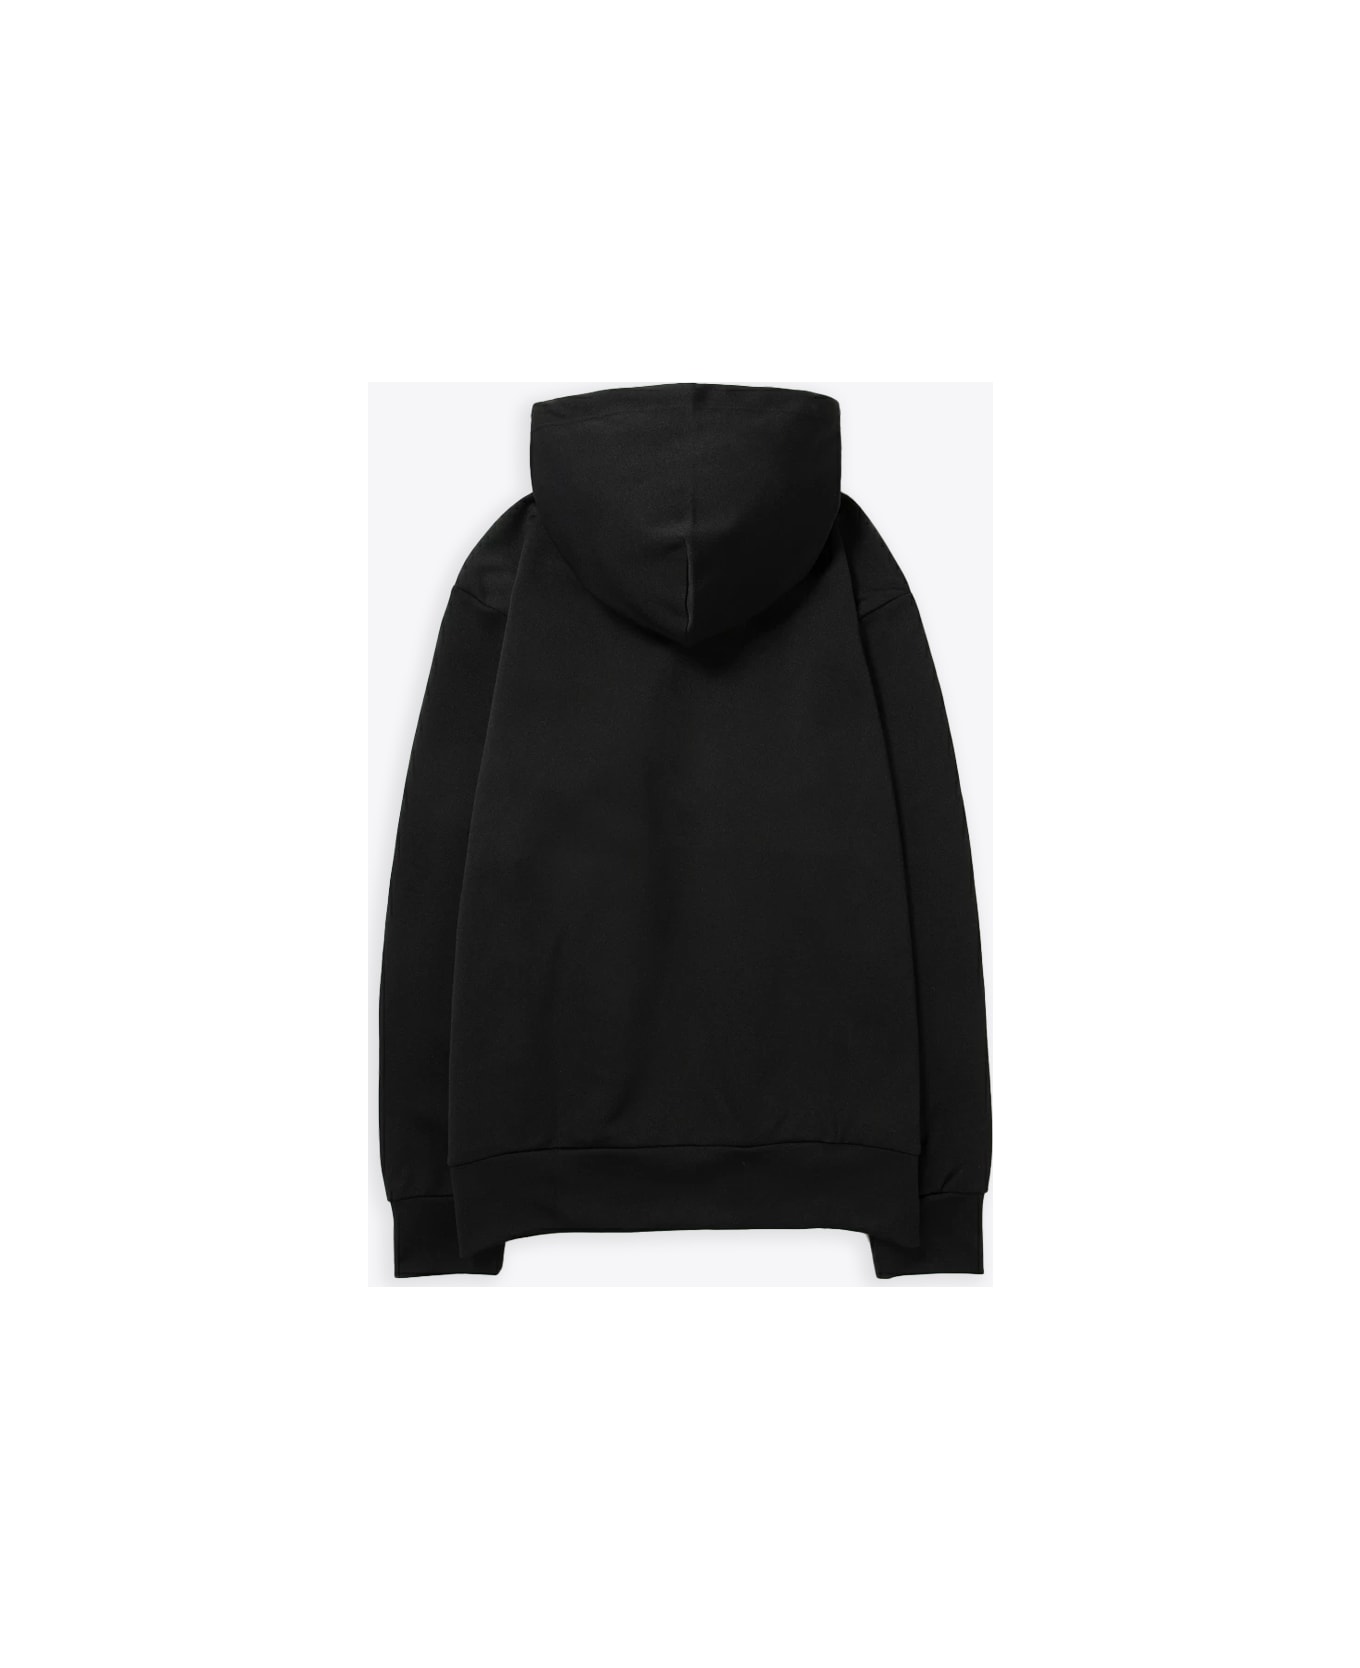 Comme des Garçons Play Mens Sweatshirt Knit Black hoodie with heart patch at chest - Nero